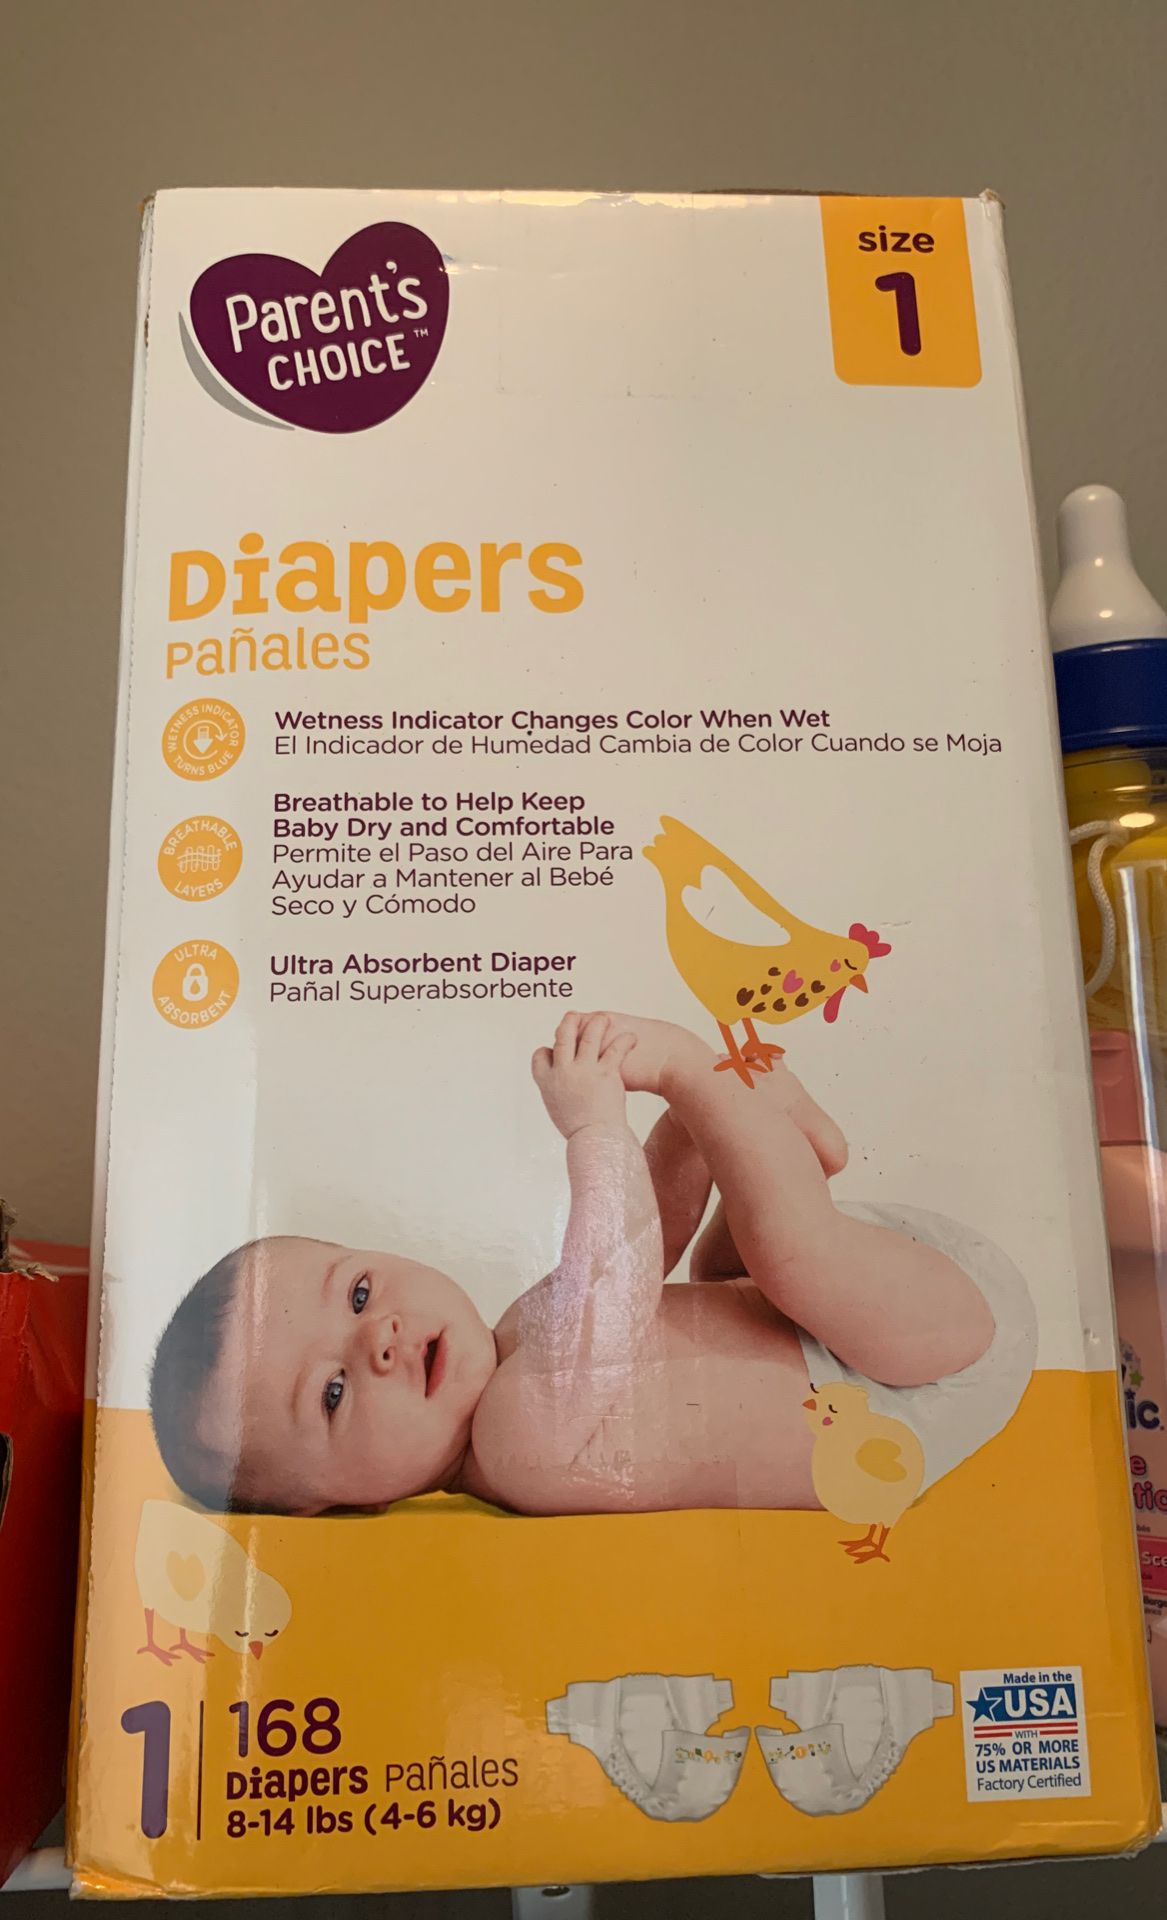 Pampers choice size 1